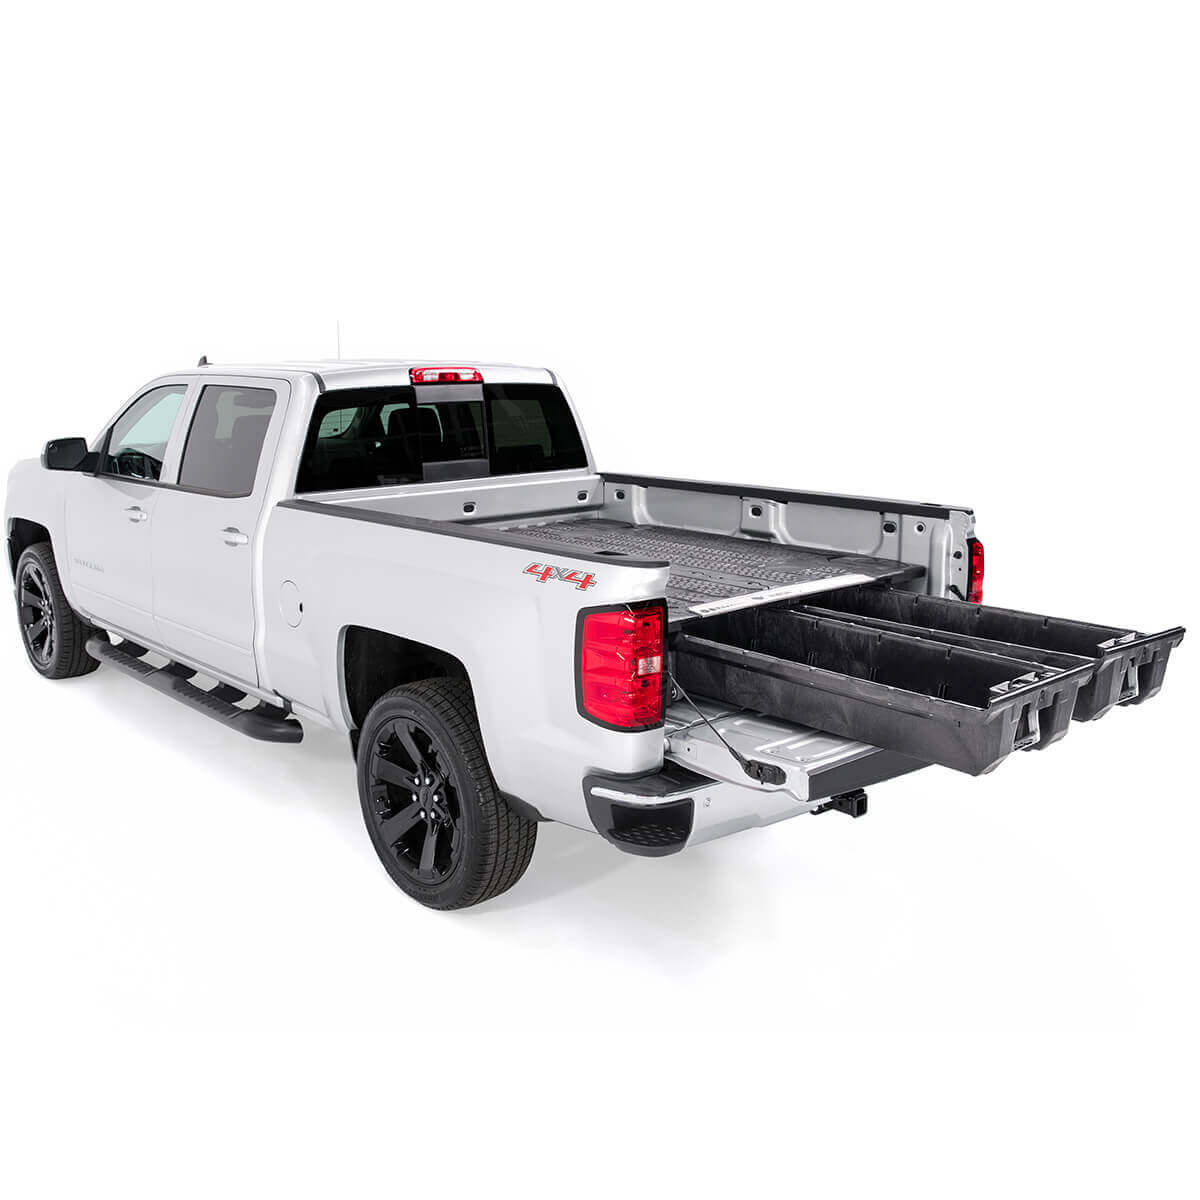 Decked 8 ft. Bed Length Storage for Silverado (2007+) 1500 LD or GMC Sierra 1500 Limited (2019)